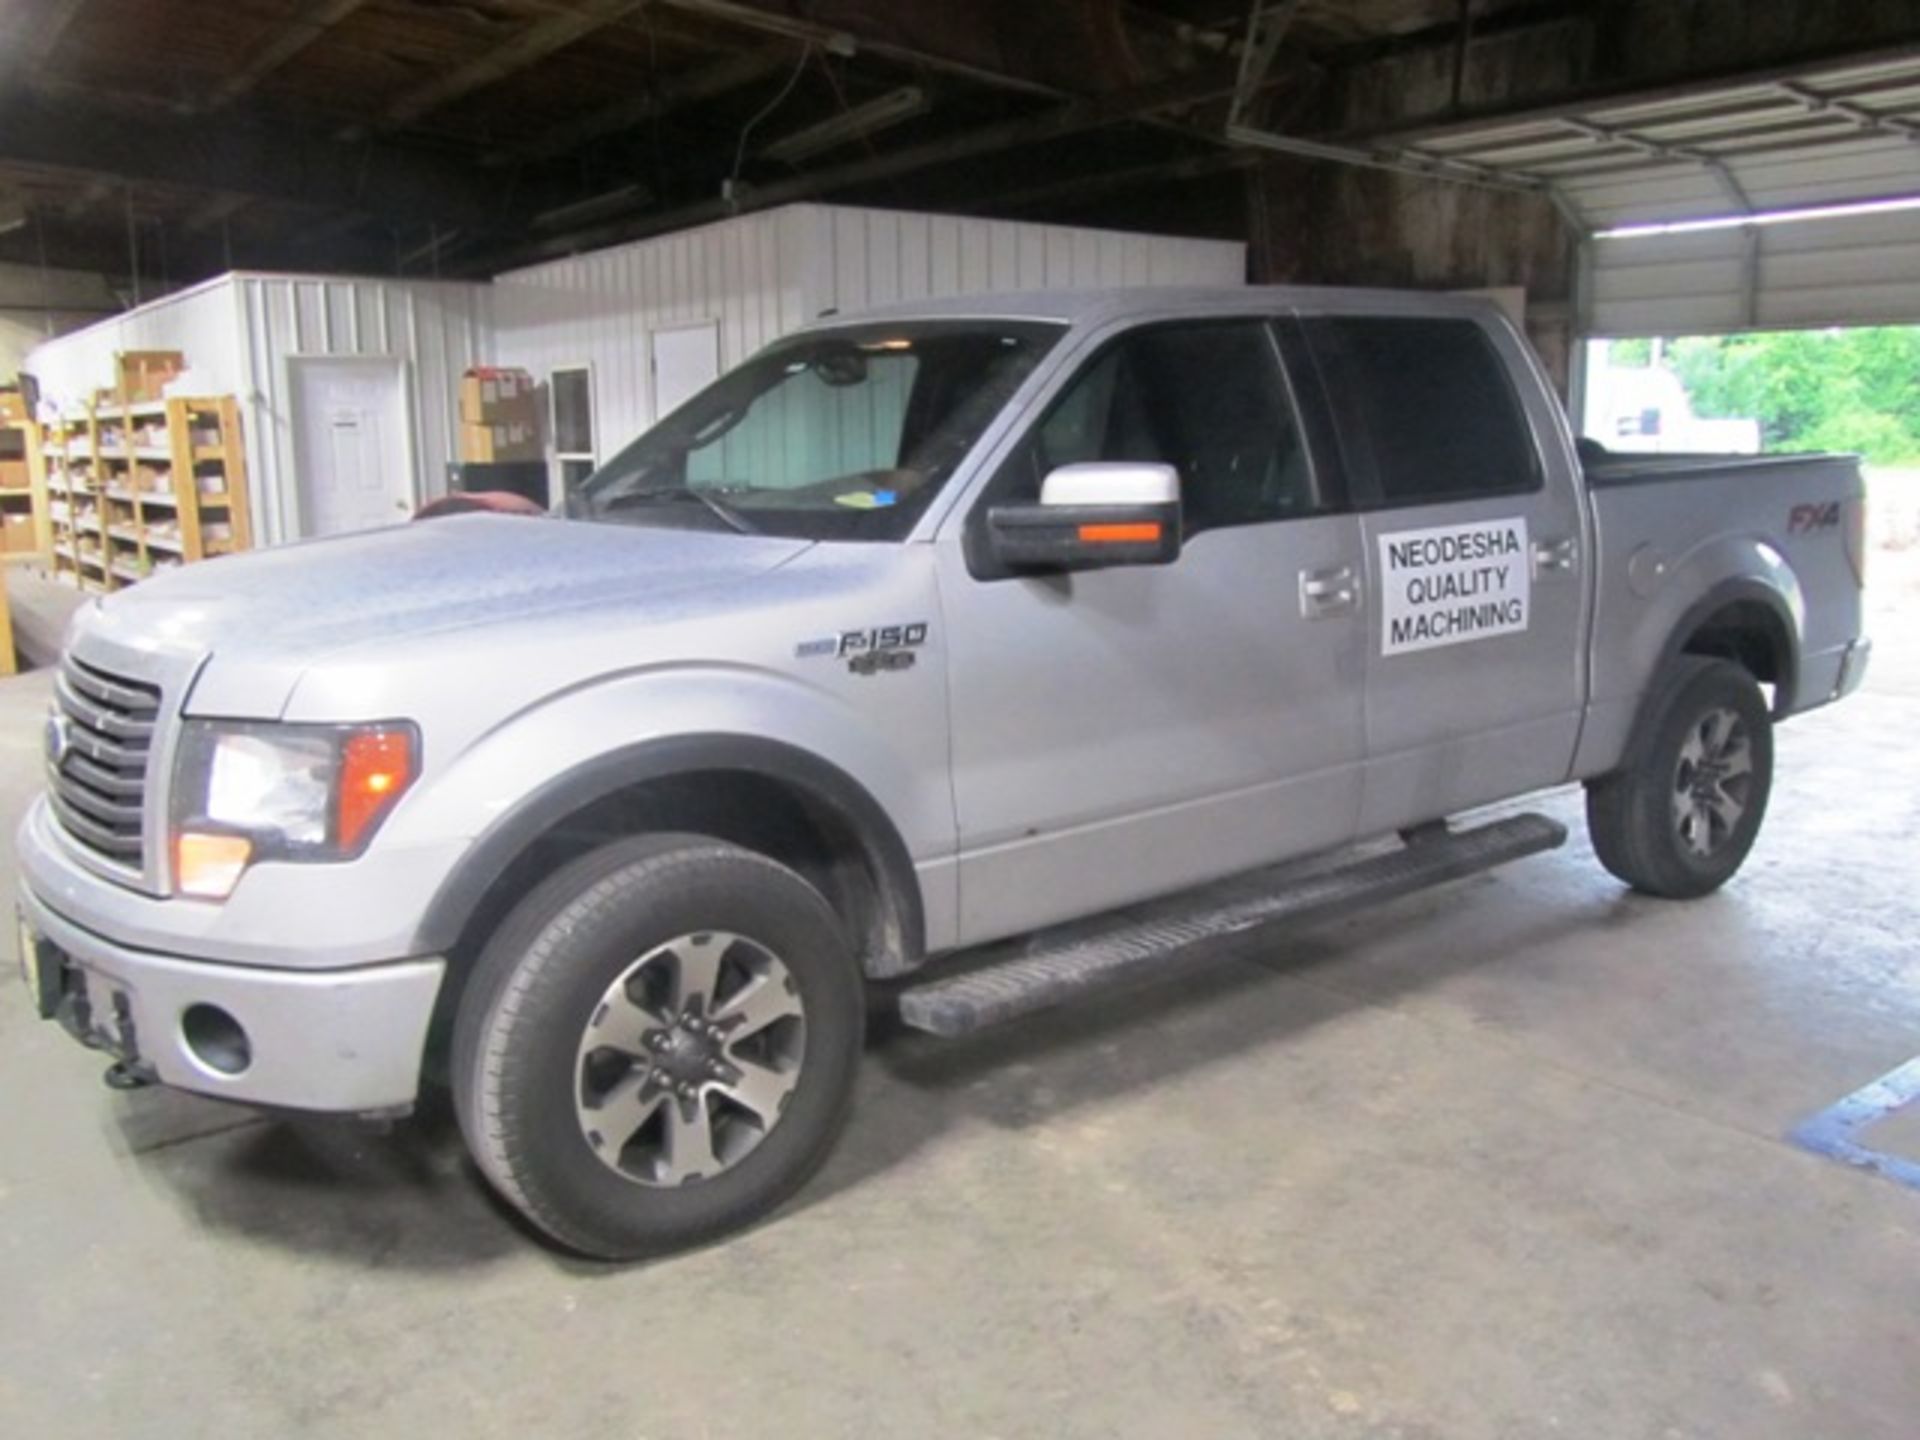 Ford F150 FX4 Crew Cab Pick-Up Truck with Short Bed, Running Boards, Automatic Transmission, 5.4 - Image 6 of 6